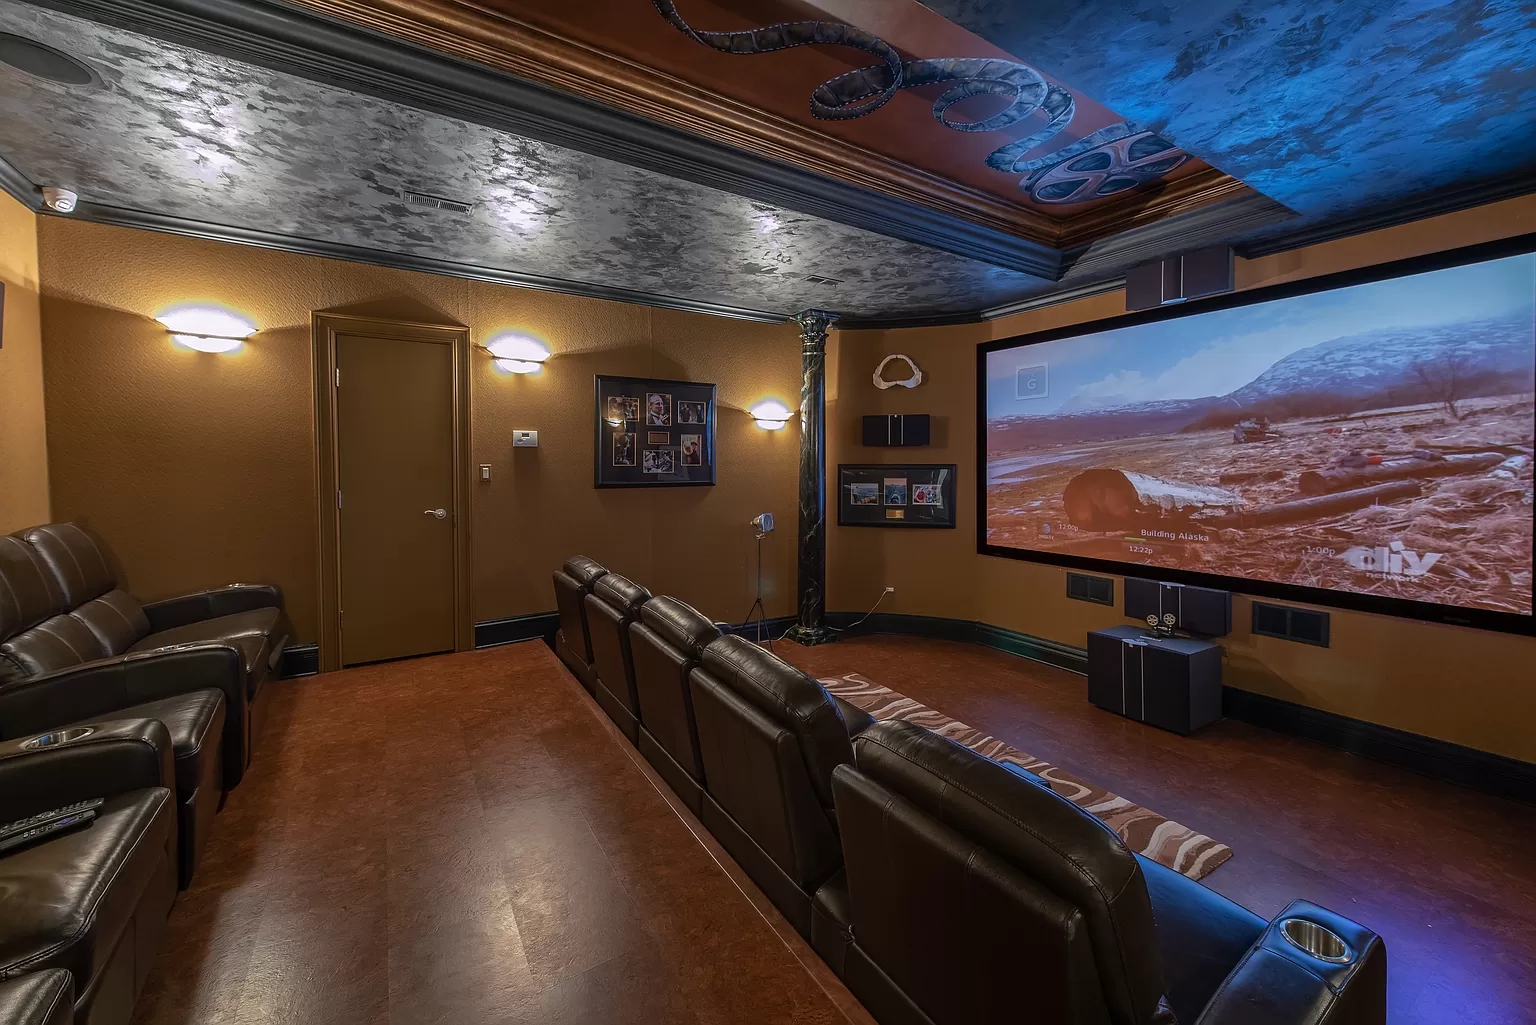 Home Movie Theater | Pictures Designs Ideas